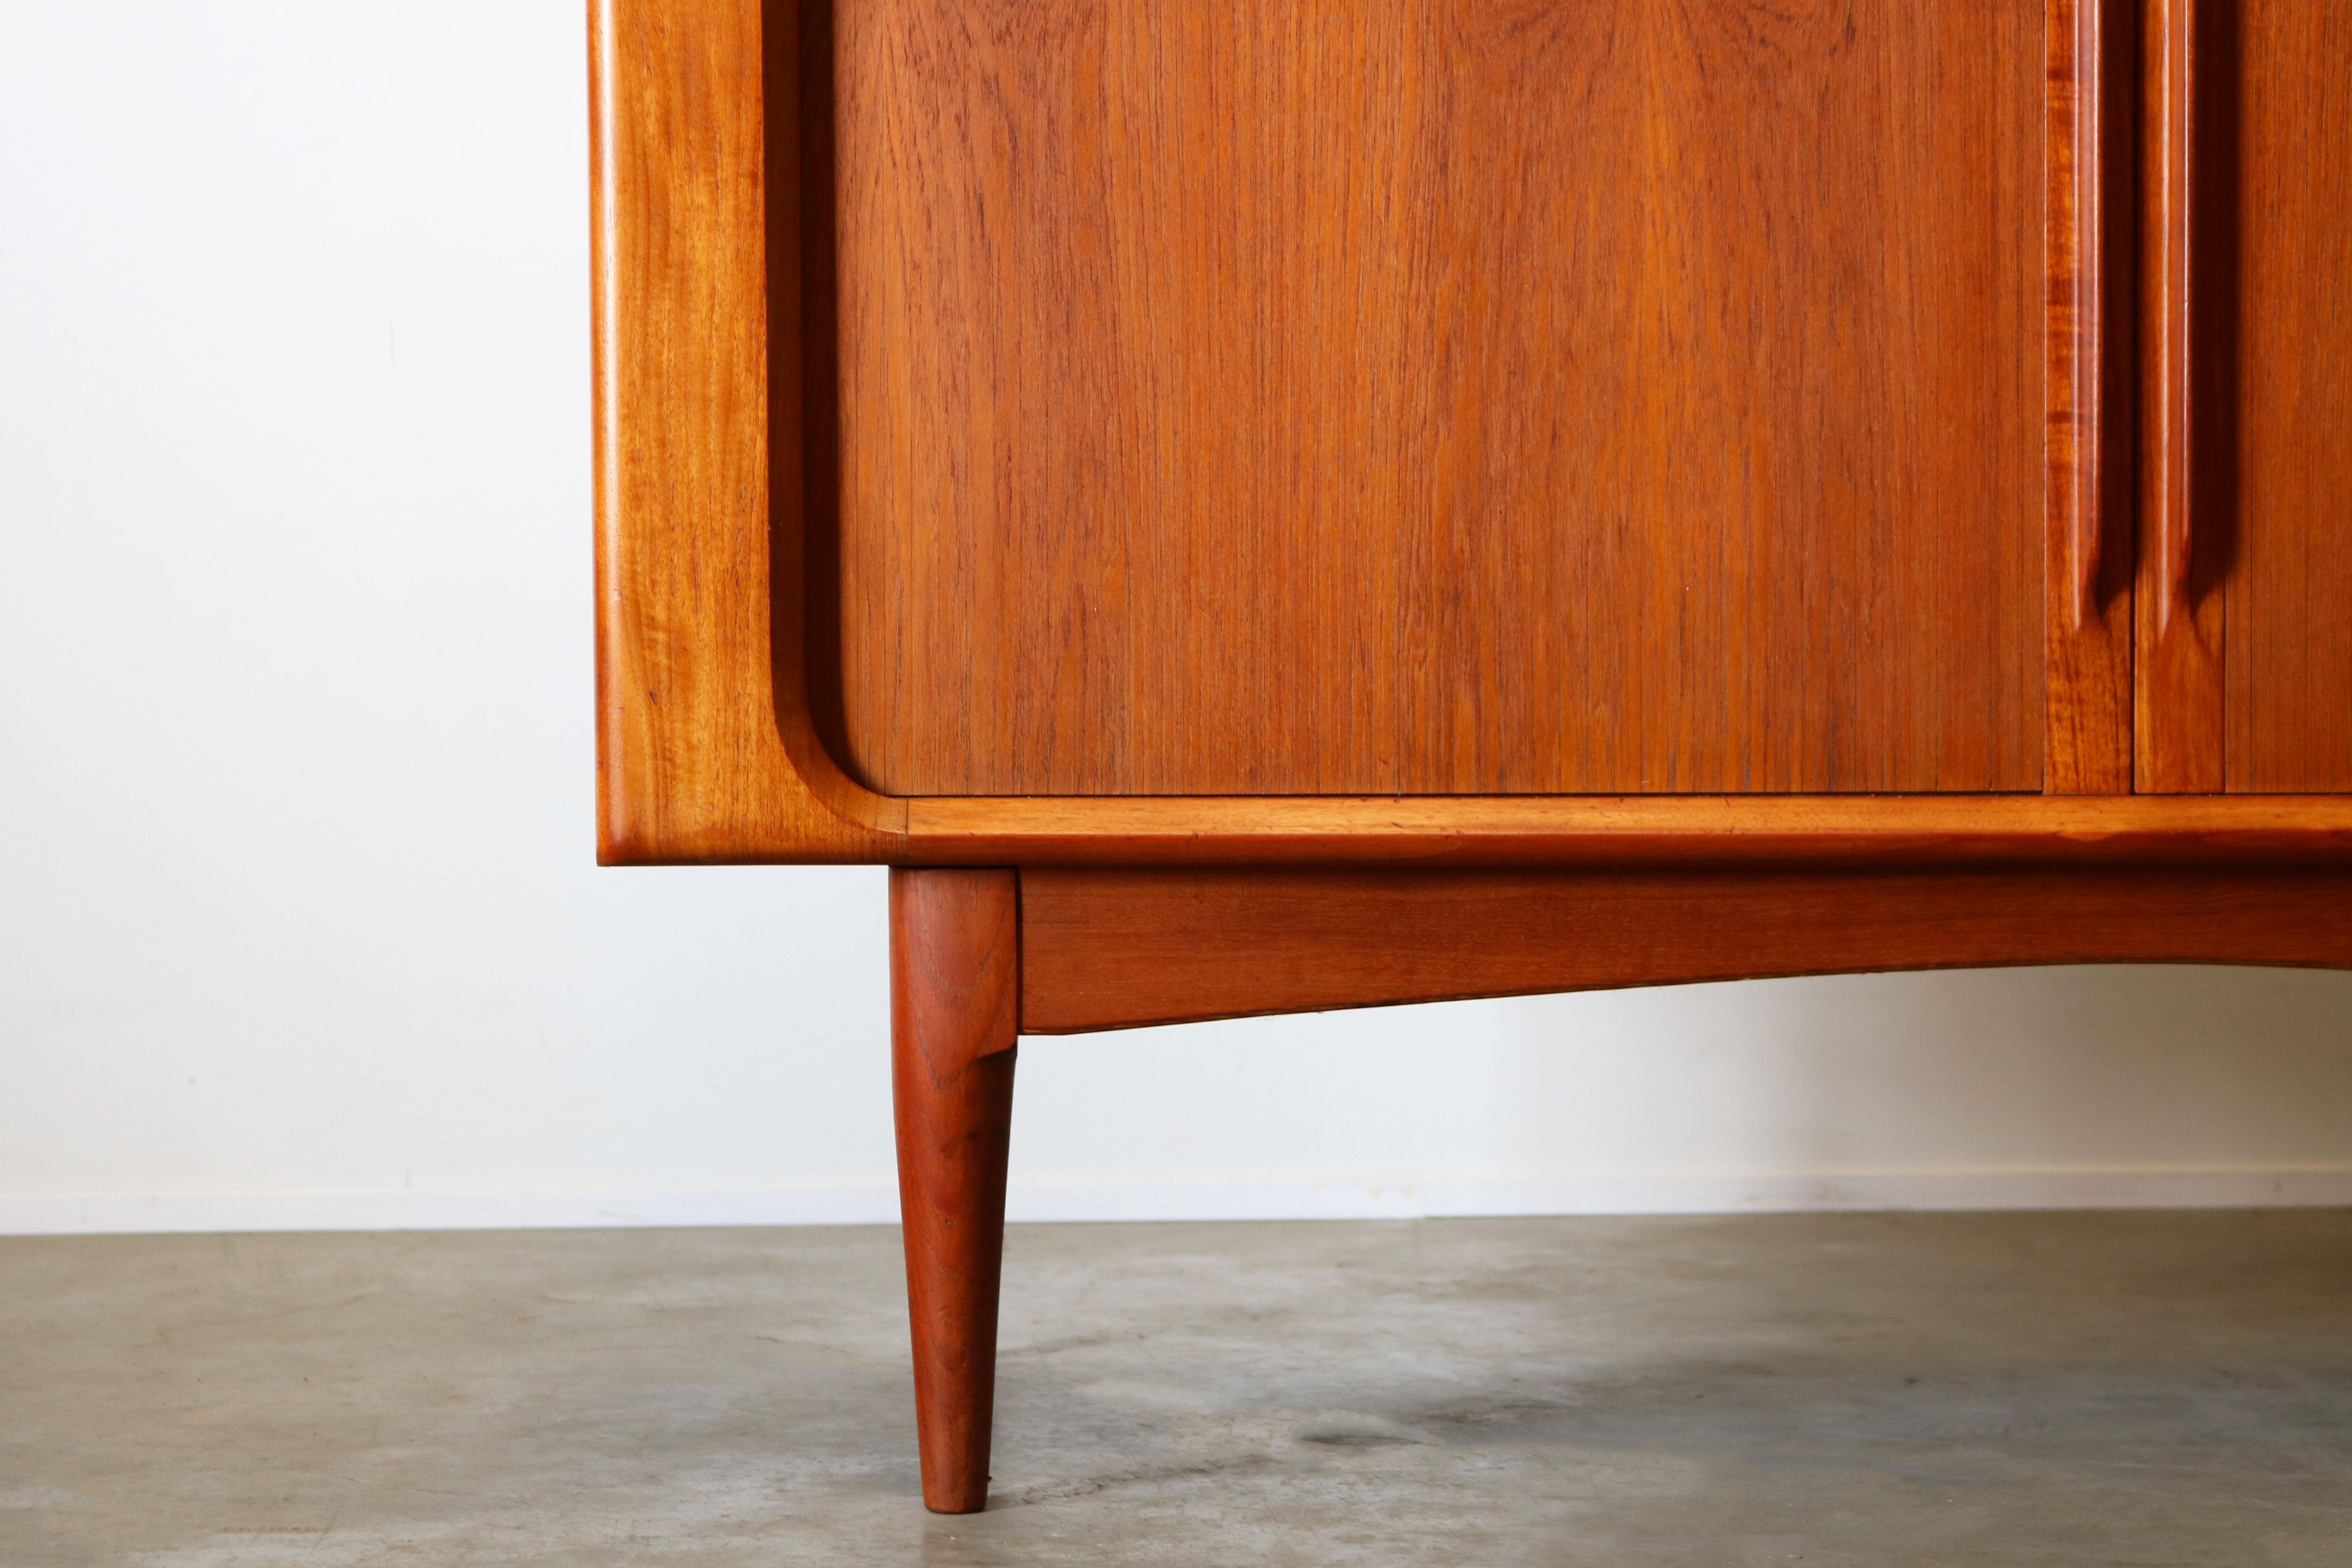 Magnificent Danish design highboard designed by Bernhard Pedersen & Son in the 1950s. The highboard is made from solid teak wood and its tambour doors disappear completely when opened. The highboard has three drawers and multiple shelves that